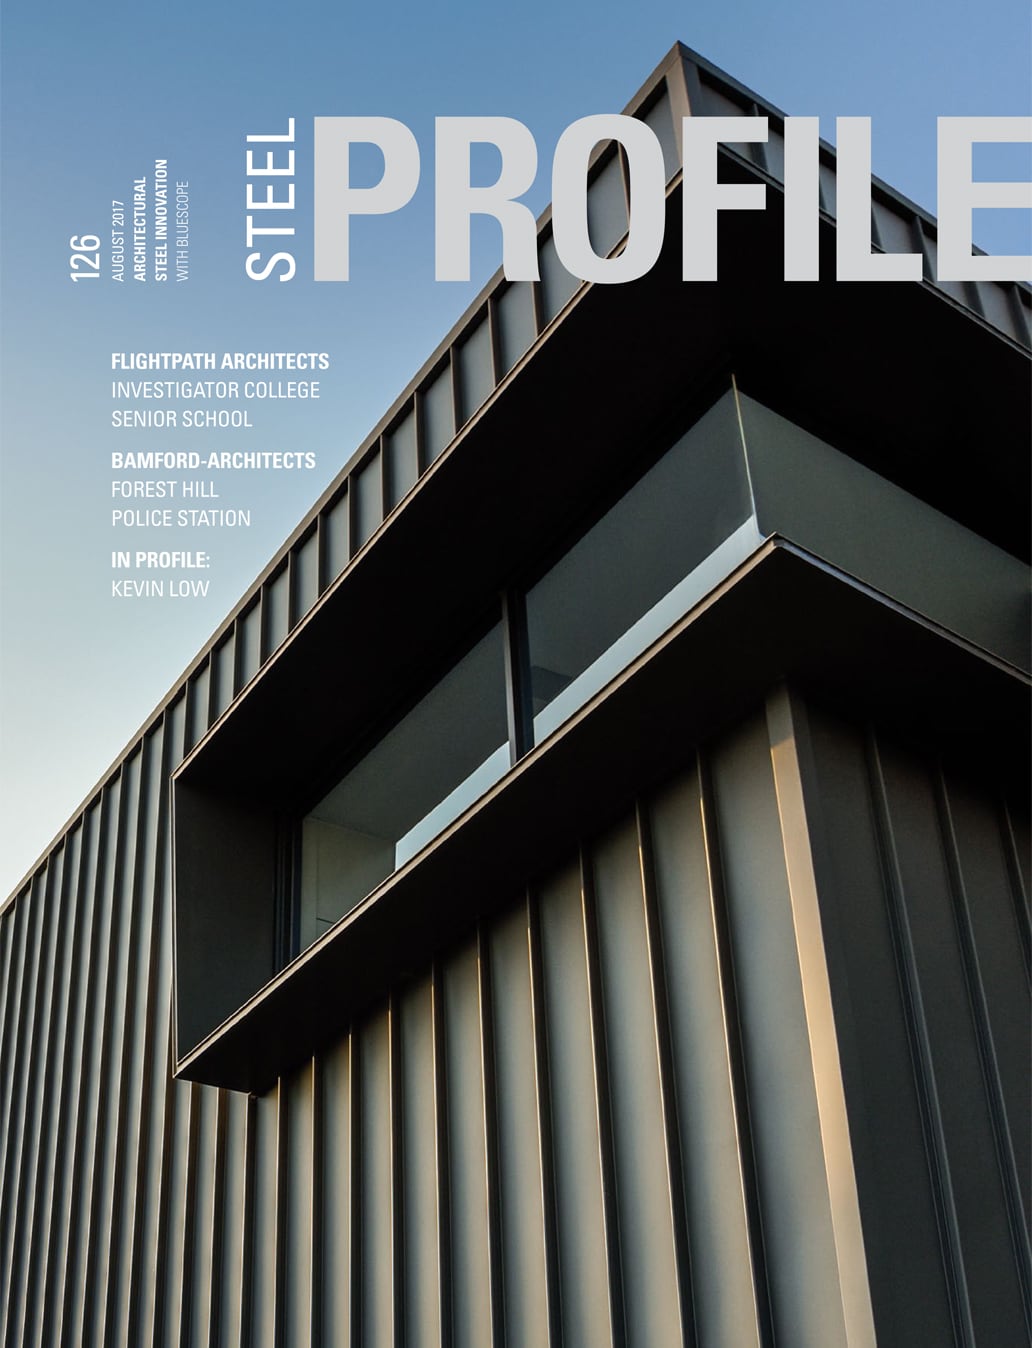 The front cover of edition 126